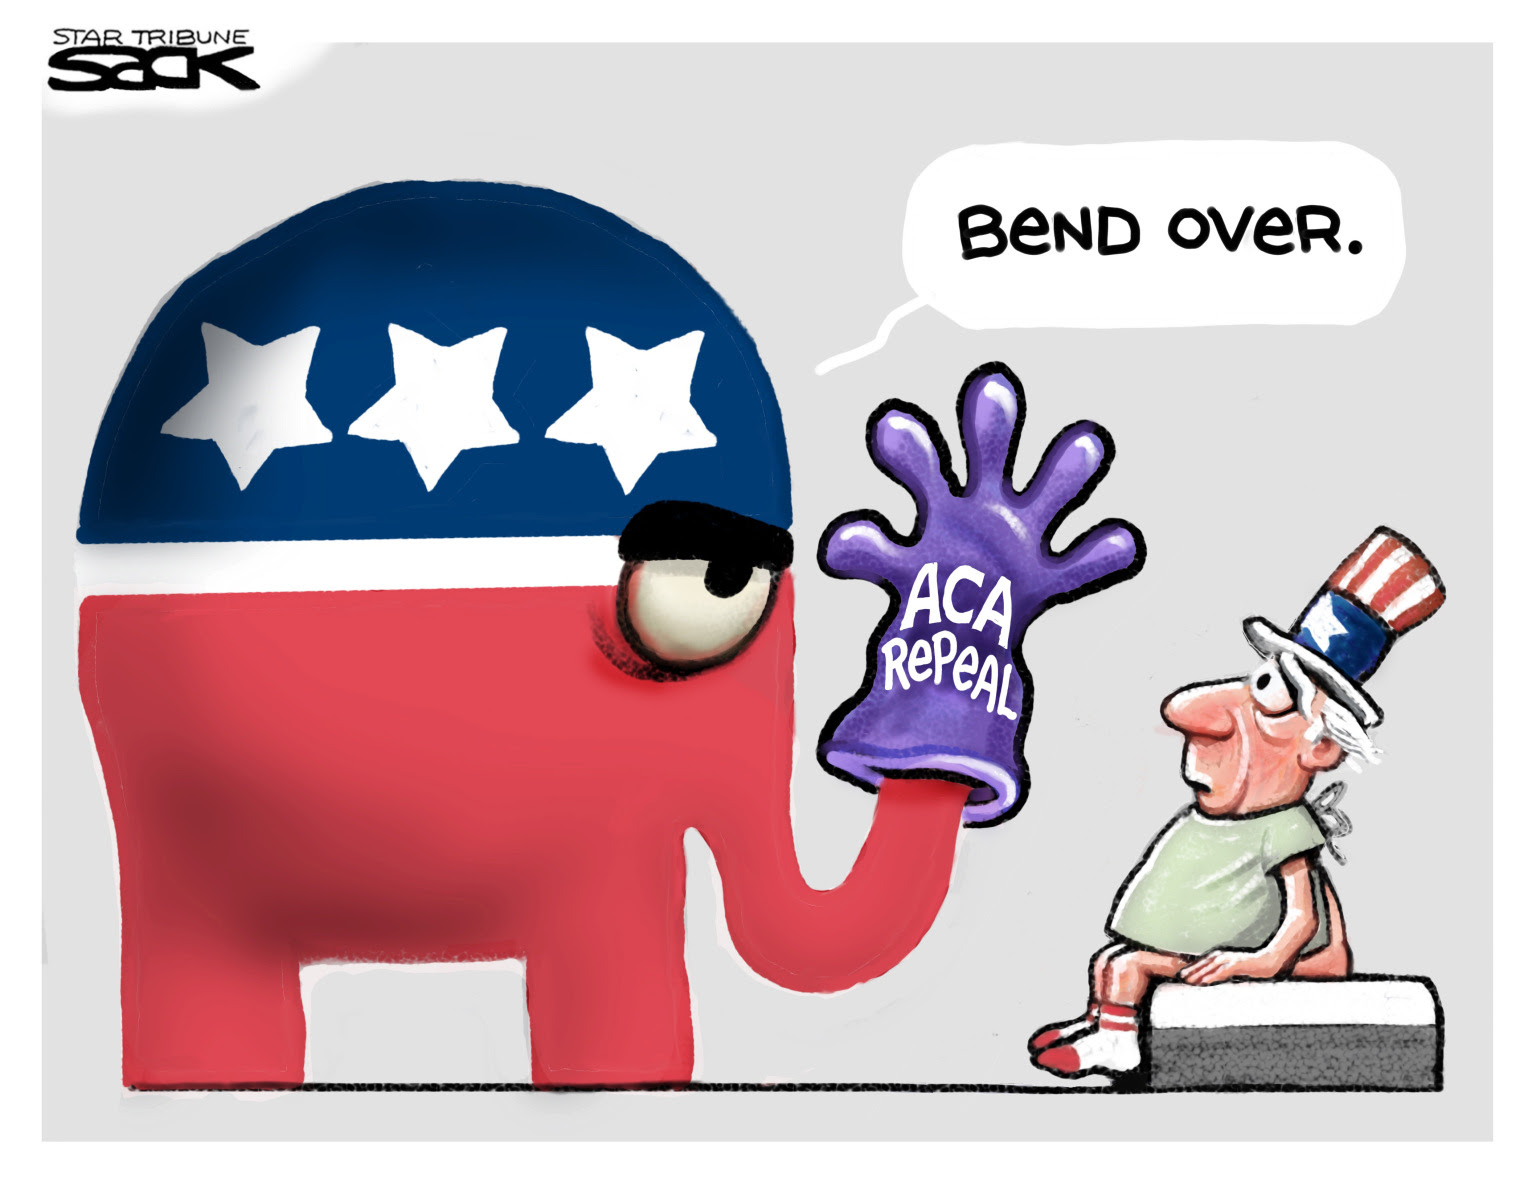 Republicans plan to repeal ACA again and deny insurance coverage to millions of Americans who suffer from LONG COVID.